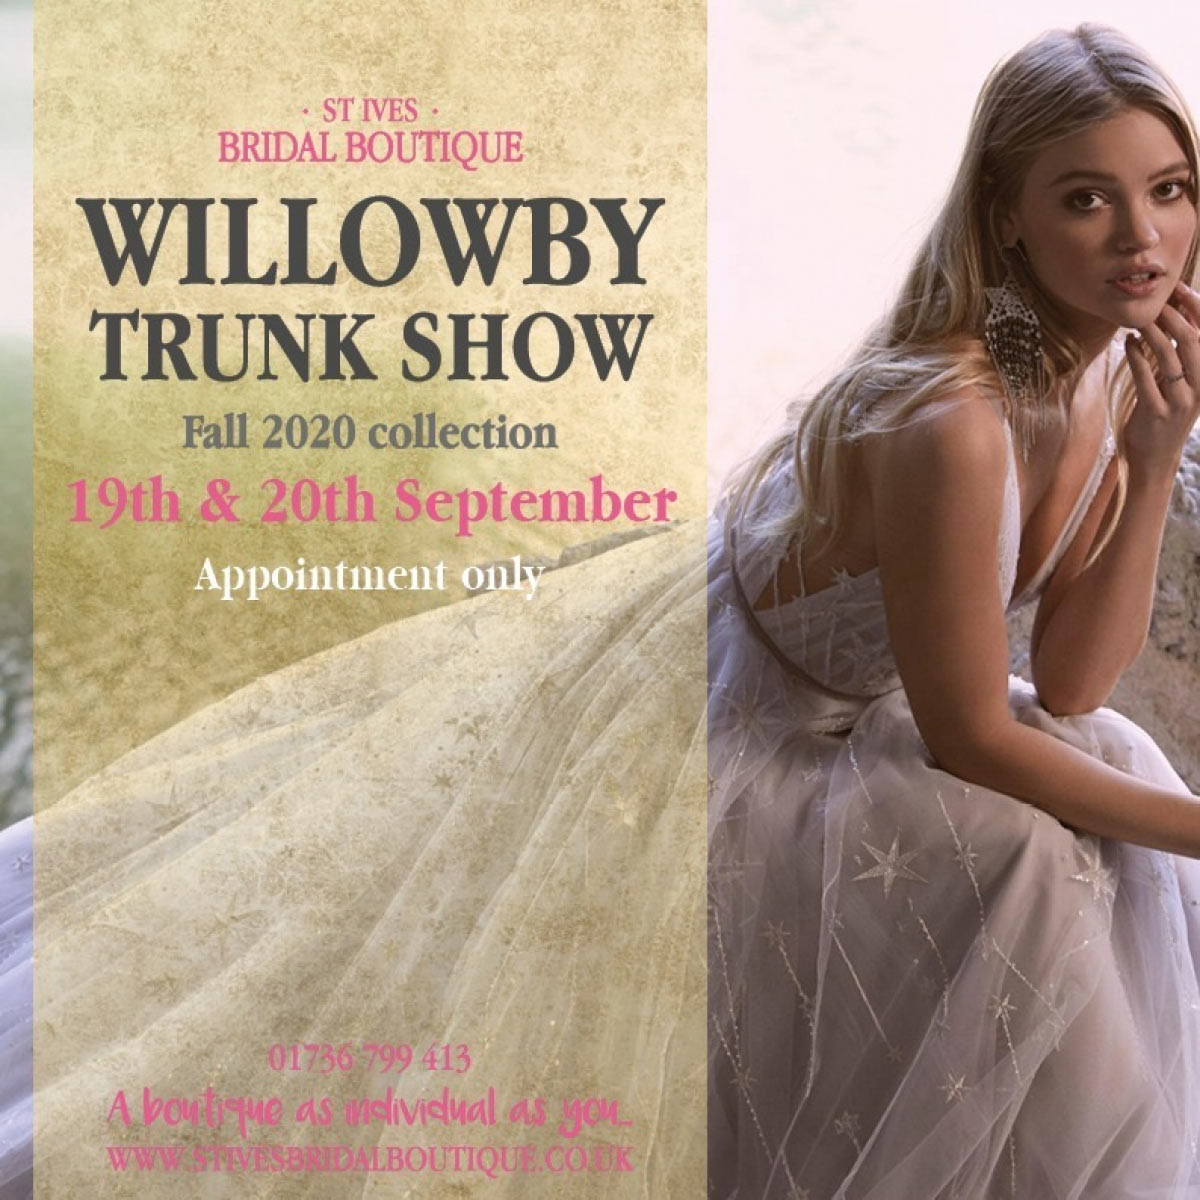 Willowby Trunk Show at St Ives Bridal Boutique